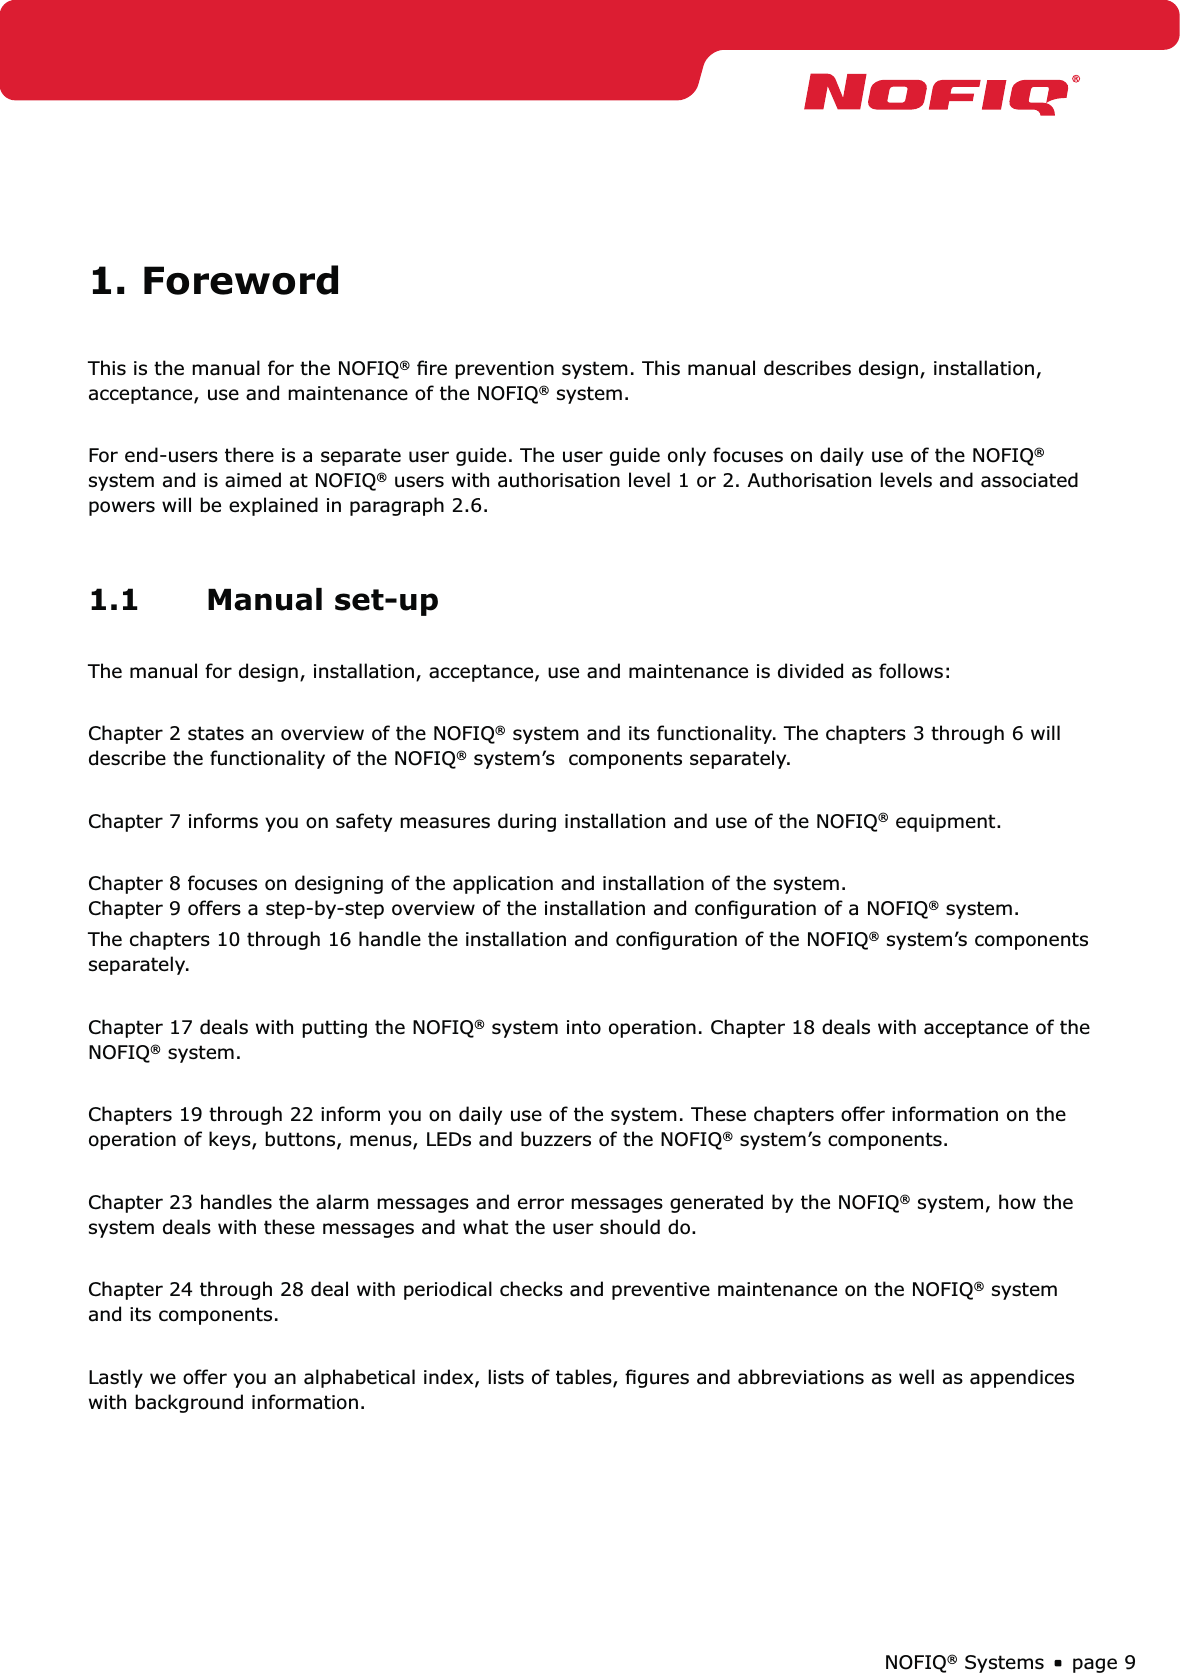 page 9NOFIQ® Systems1. ForewordThis is the manual for the NOFIQ® ﬁre prevention system. This manual describes design, installation, acceptance, use and maintenance of the NOFIQ® system.For end-users there is a separate user guide. The user guide only focuses on daily use of the NOFIQ® system and is aimed at NOFIQ® users with authorisation level 1 or 2. Authorisation levels and associated powers will be explained in paragraph 2.6.1.1 Manual set-upThe manual for design, installation, acceptance, use and maintenance is divided as follows:Chapter 2 states an overview of the NOFIQ® system and its functionality. The chapters 3 through 6 will describe the functionality of the NOFIQ® system’s  components separately.Chapter 7 informs you on safety measures during installation and use of the NOFIQ® equipment.Chapter 8 focuses on designing of the application and installation of the system.  Chapter 9 offers a step-by-step overview of the installation and conﬁguration of a NOFIQ® system.The chapters 10 through 16 handle the installation and conﬁguration of the NOFIQ® system’s components separately.Chapter 17 deals with putting the NOFIQ® system into operation. Chapter 18 deals with acceptance of the NOFIQ® system.Chapters 19 through 22 inform you on daily use of the system. These chapters offer information on the operation of keys, buttons, menus, LEDs and buzzers of the NOFIQ® system’s components. Chapter 23 handles the alarm messages and error messages generated by the NOFIQ® system, how the system deals with these messages and what the user should do.Chapter 24 through 28 deal with periodical checks and preventive maintenance on the NOFIQ® system and its components.Lastly we offer you an alphabetical index, lists of tables, ﬁgures and abbreviations as well as appendices with background information.